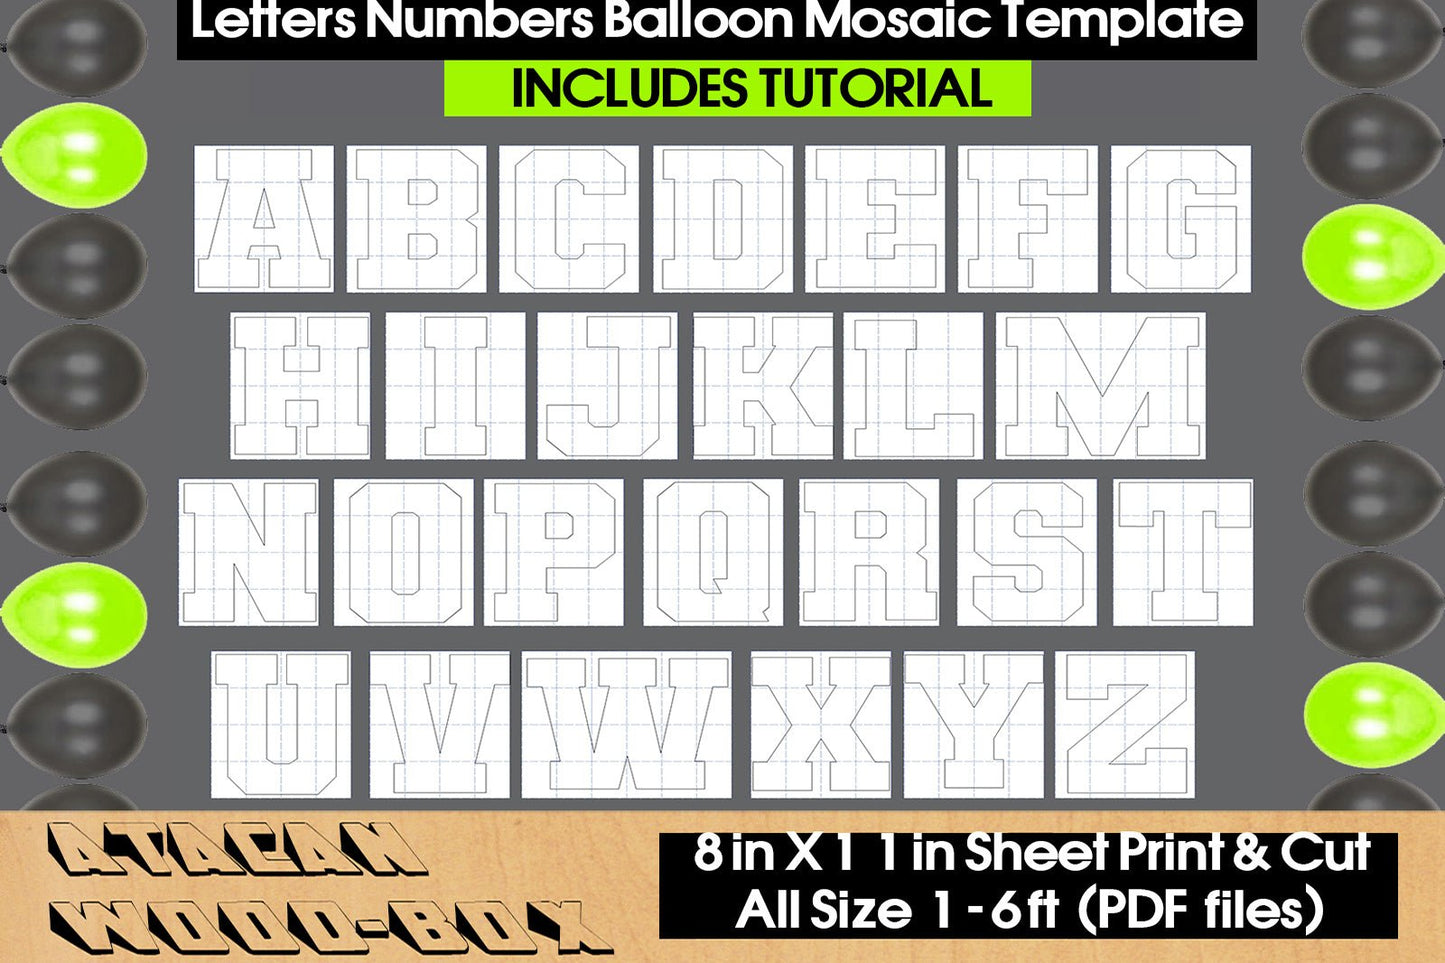 Mosaic Balloons Templates / Square Letters and Numbers 1-6ft All size SVG DXF Ai CDR 334